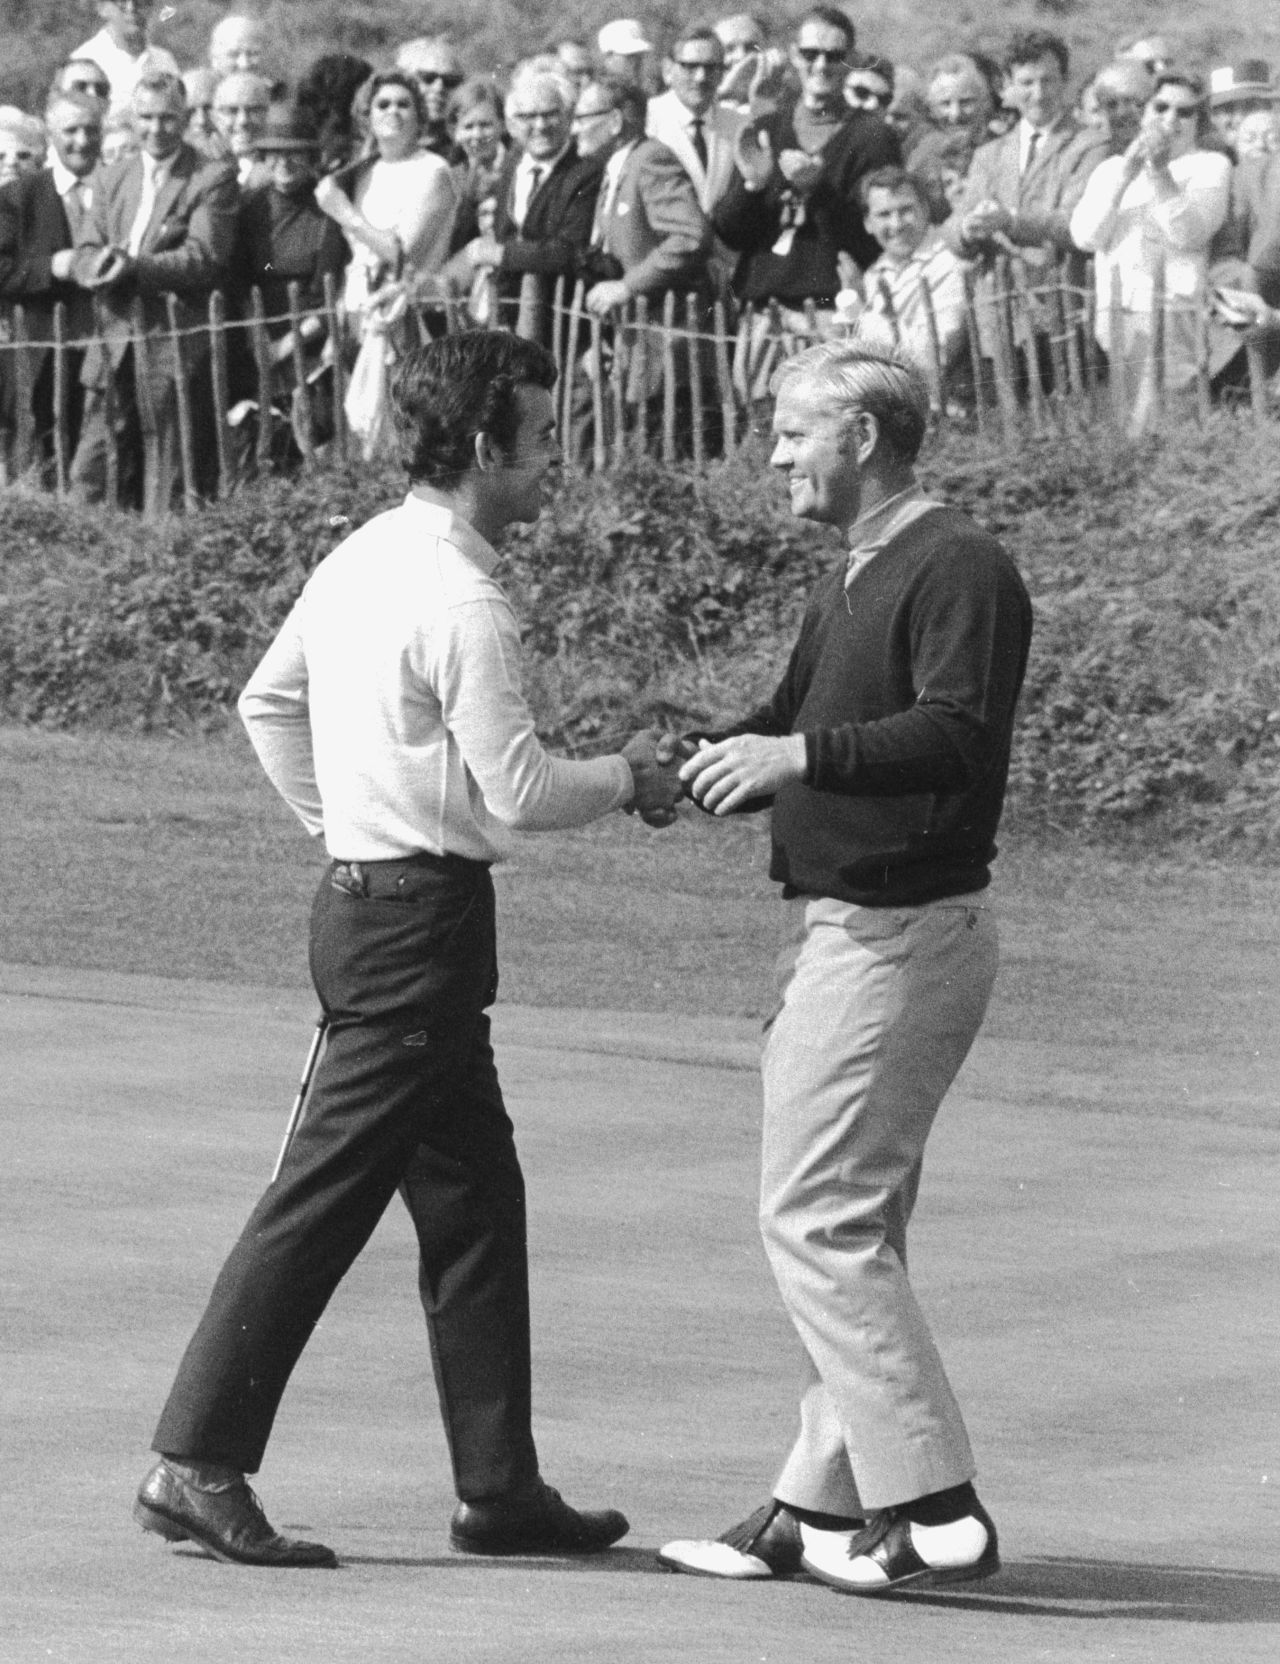 Tony Jacklin and Jack Nicklaus shake hands at the end of their famous tied singles match at Royal Birkdale in 1969 -- leaving the overall match tied at 16-16 in a gripping encounter. Nicklaus conceded a tricky putt for Jacklin on the last green in a famous act of sportmanship.